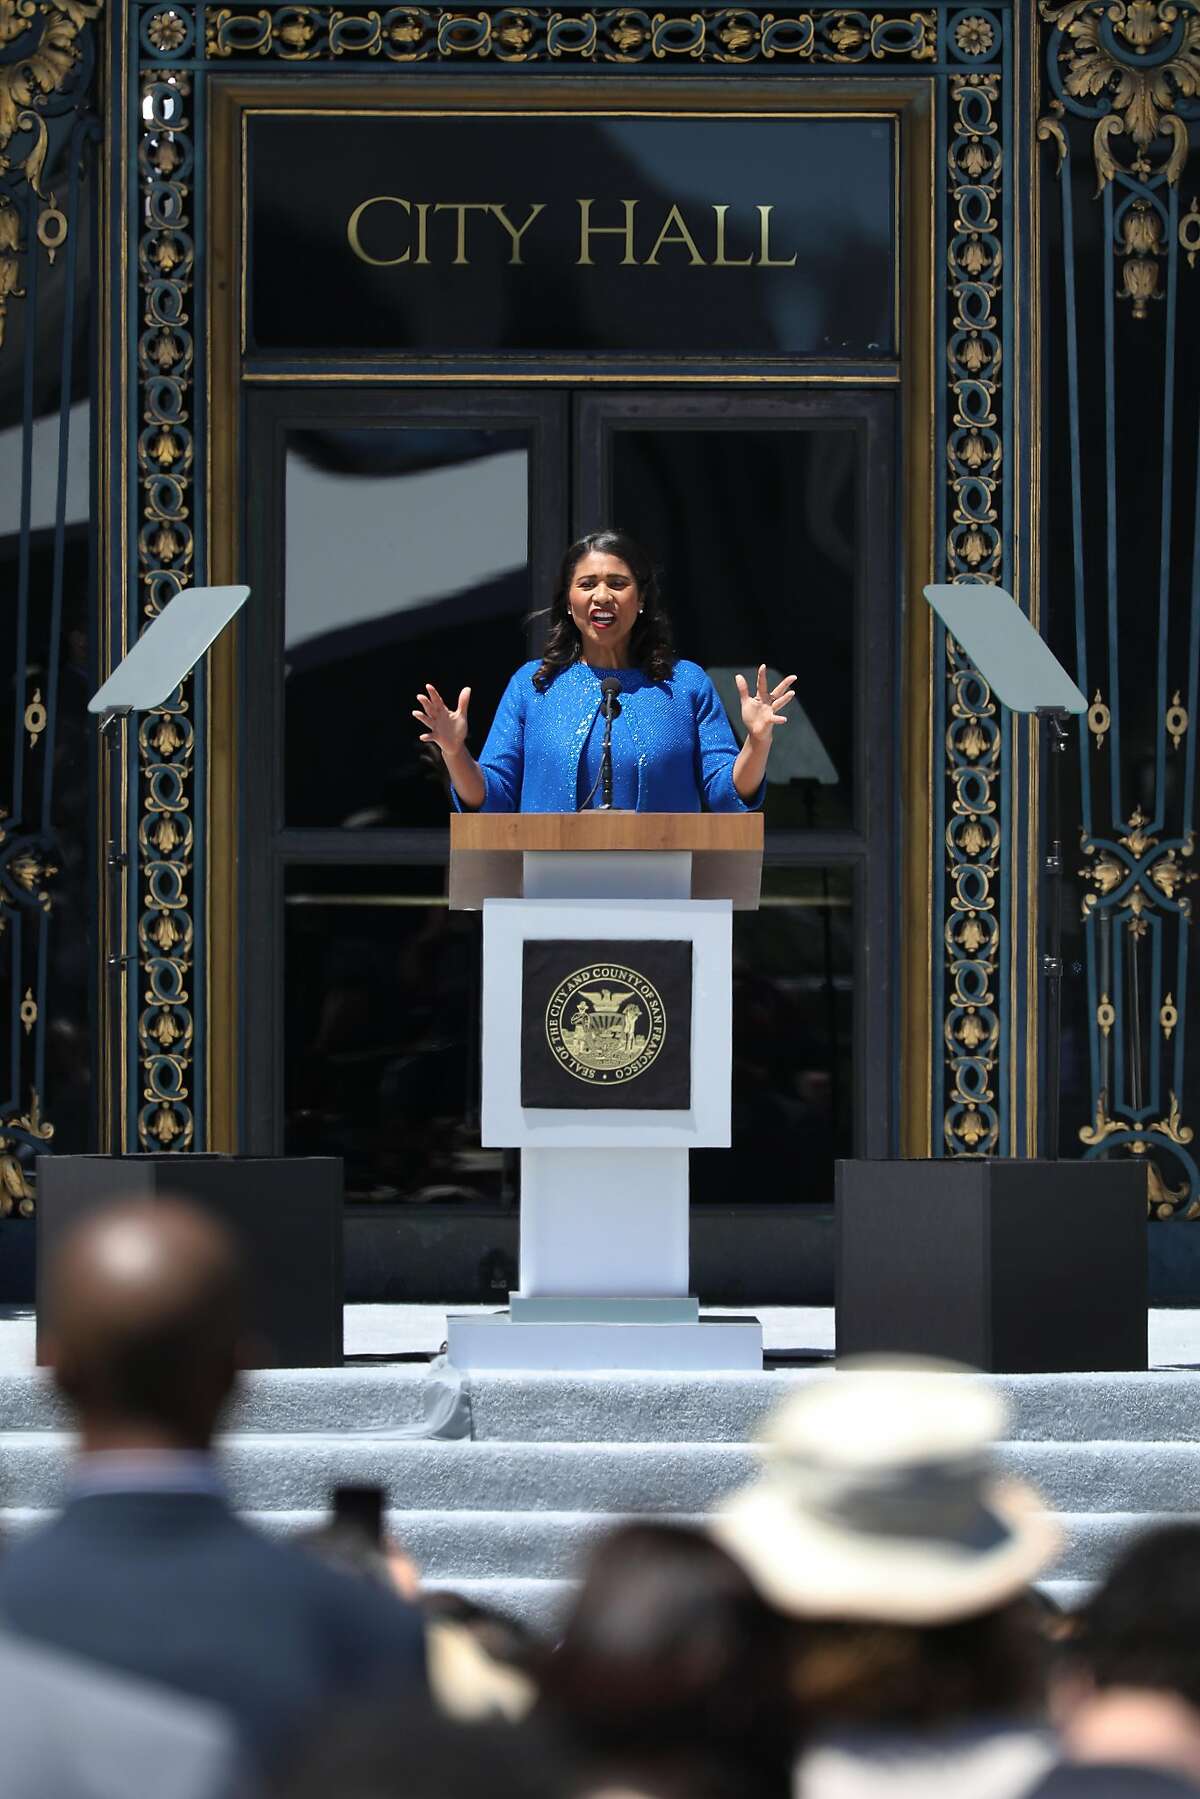 Mayor London Breed speaks to the crowd after taking the oath of office during her inauguration on Wednesday, July 11, 2018 in San Francisco, Calif.